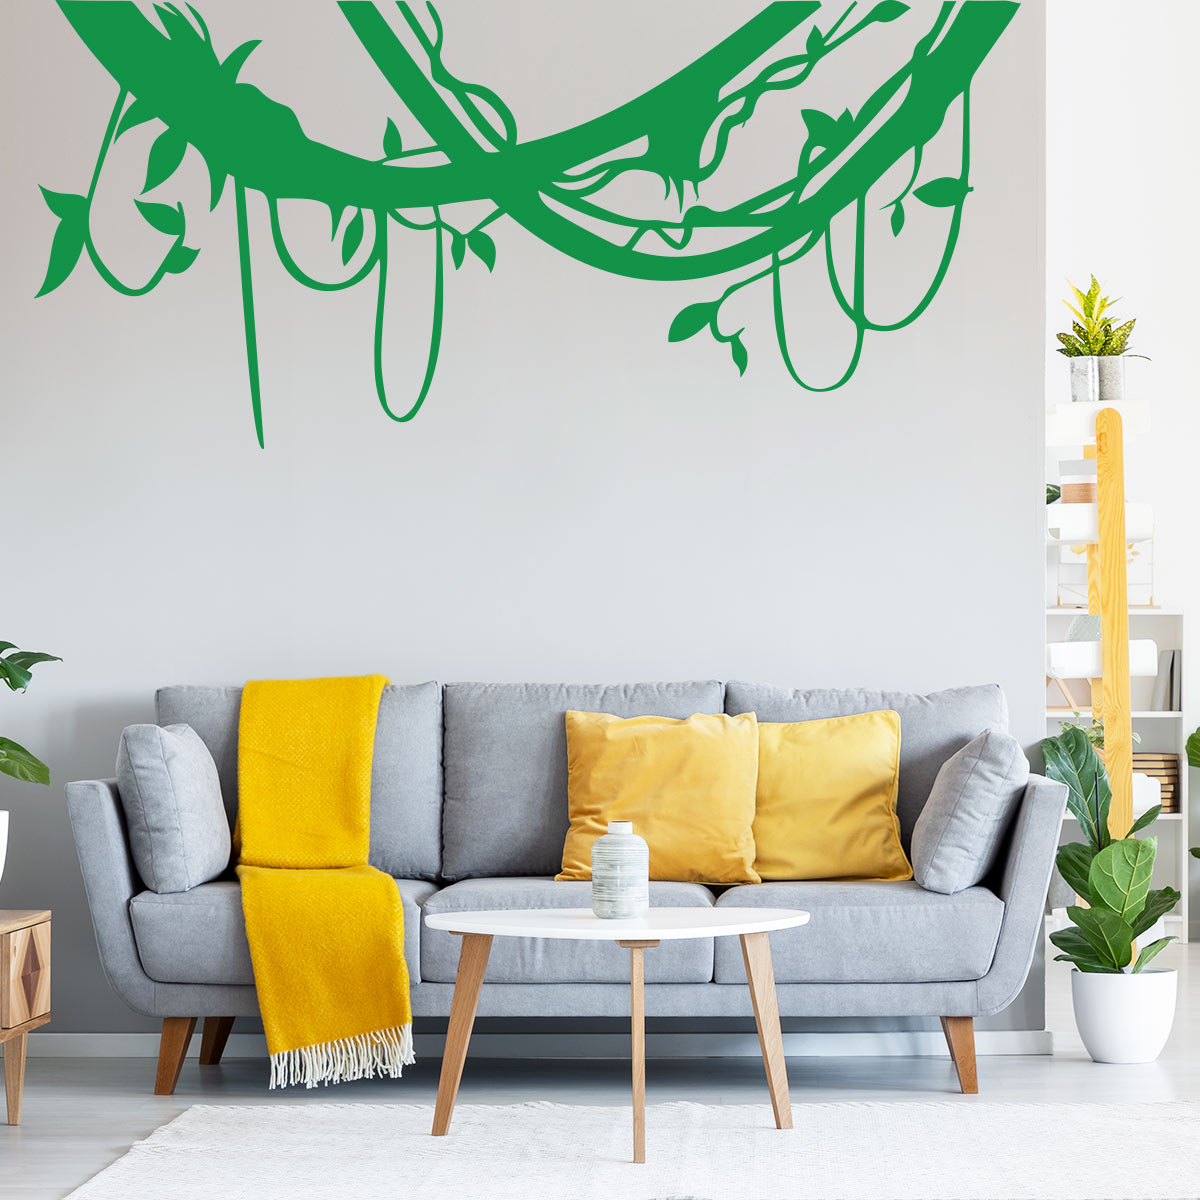 Wall decal plants The creepers of the jungle